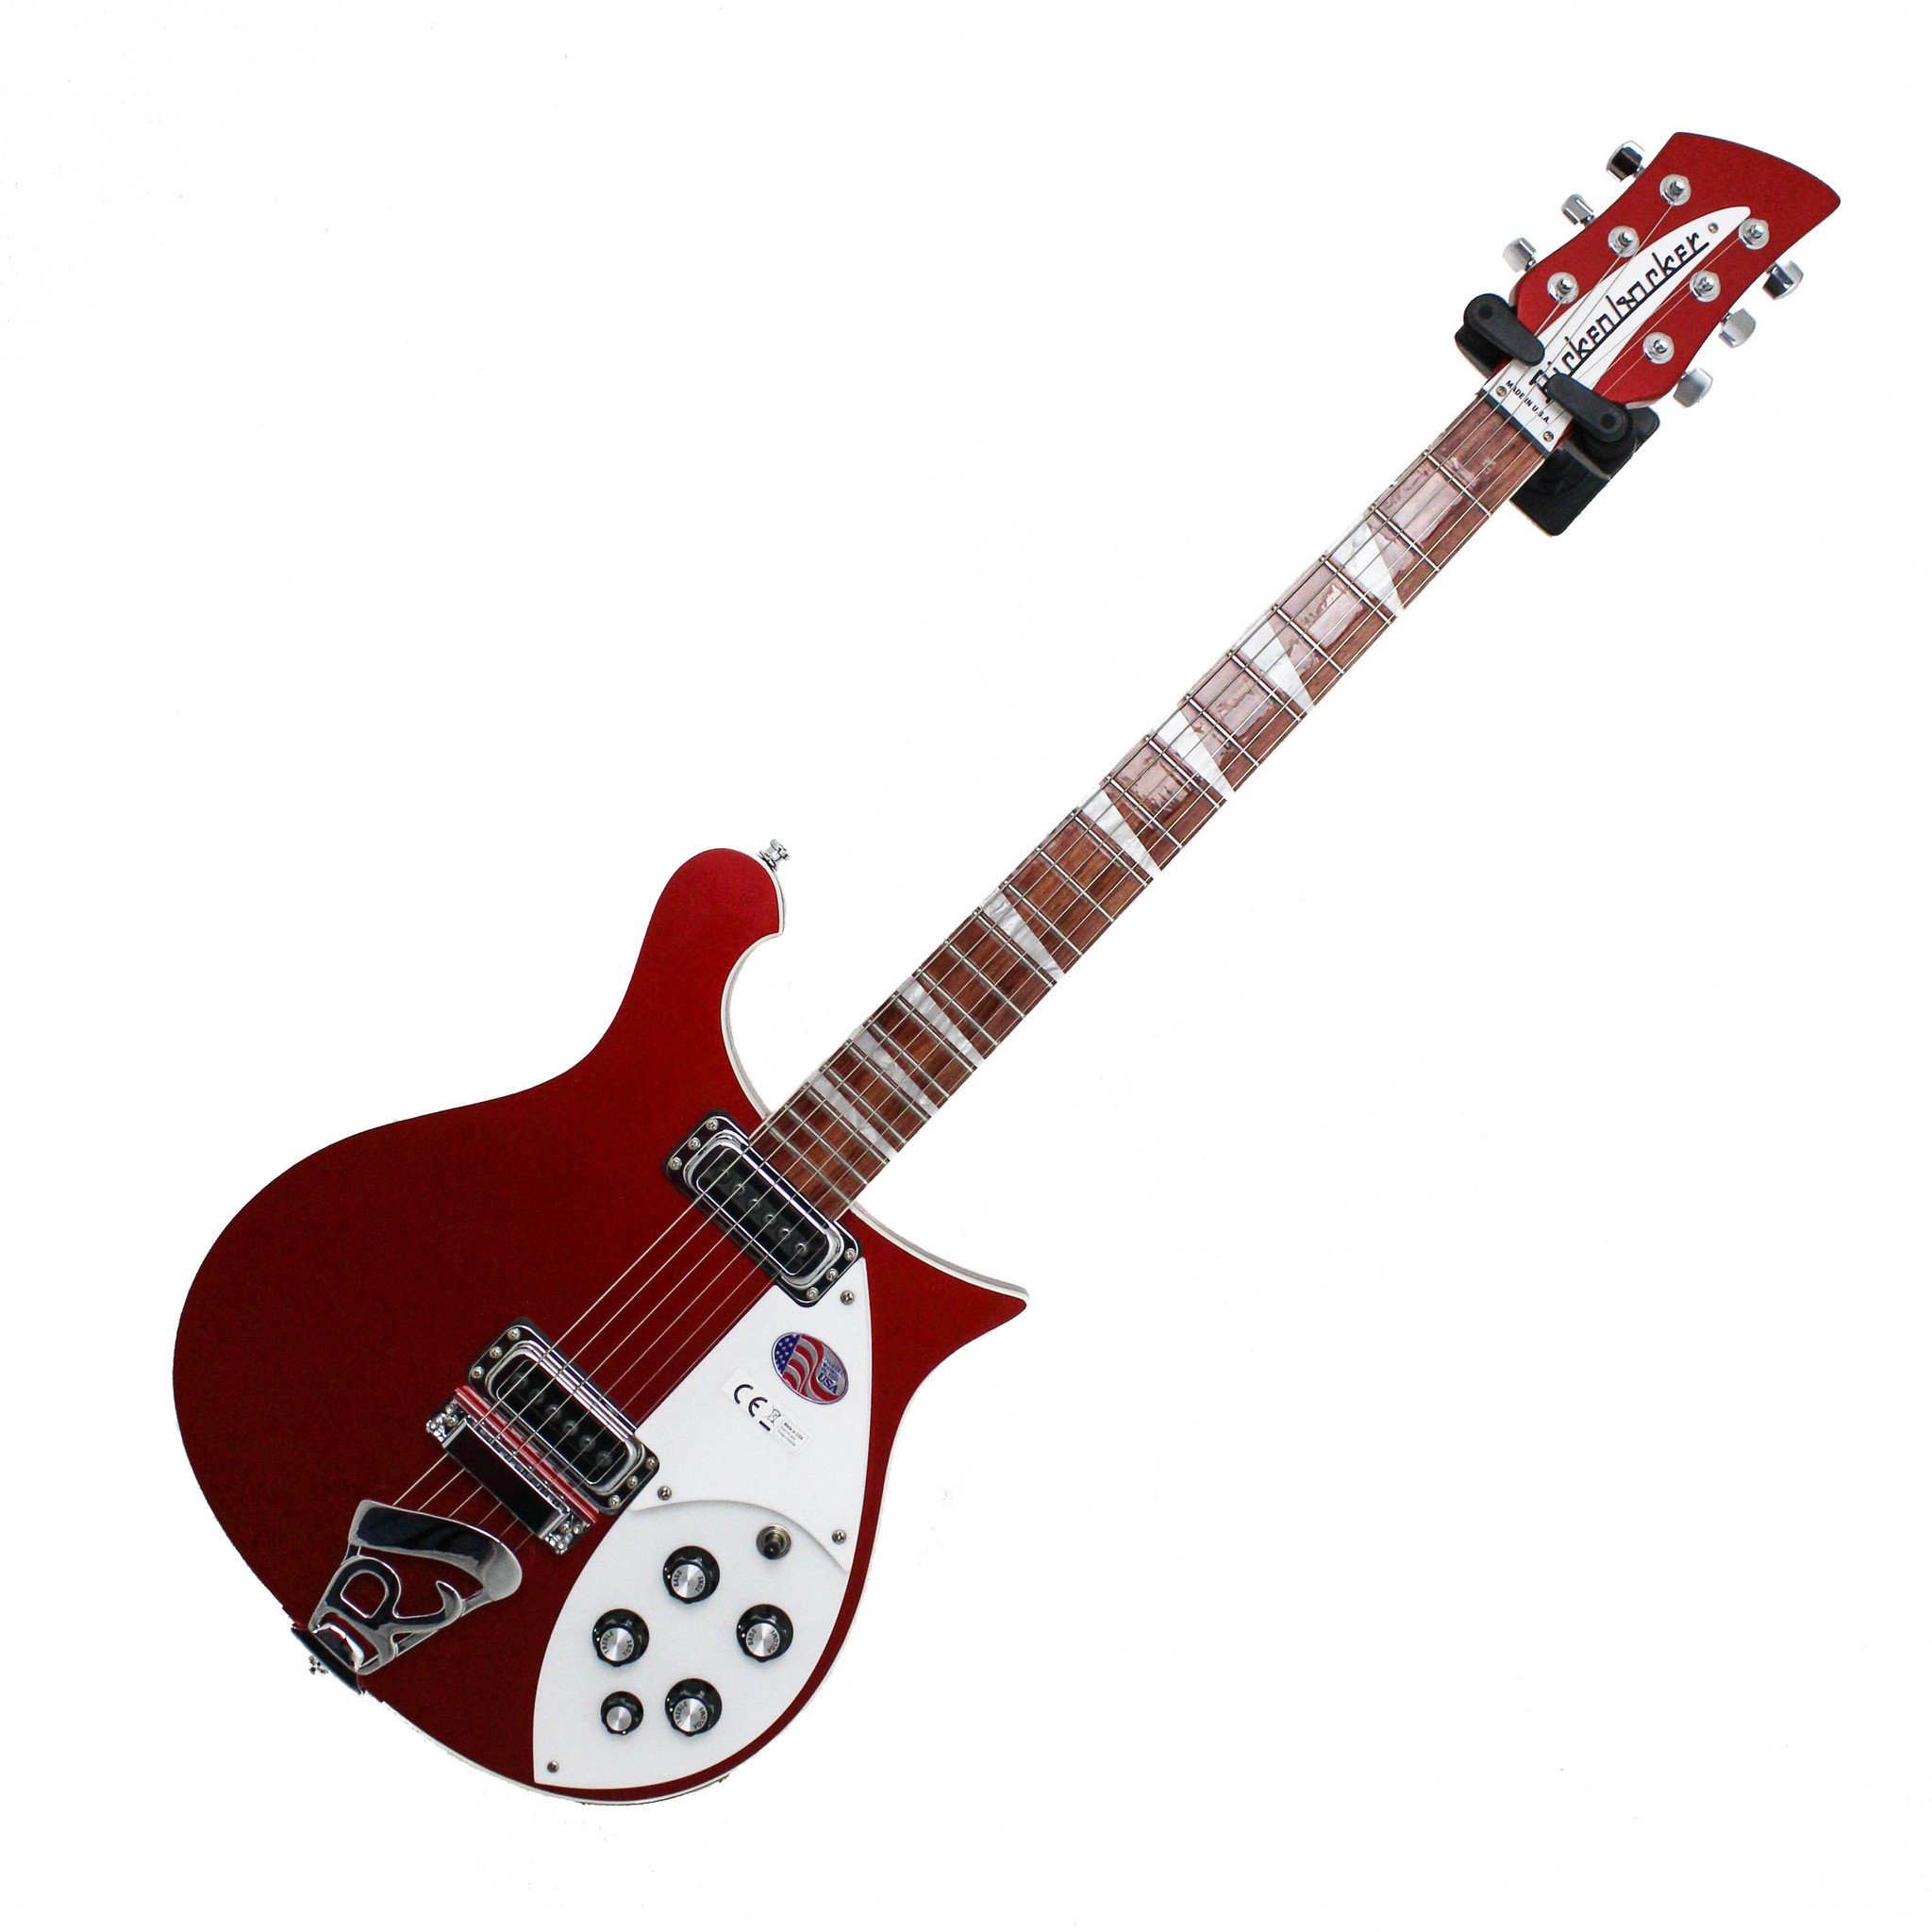 Rickenbacker 620 Ruby Red Electric Guitar with hard case - Guitar ...